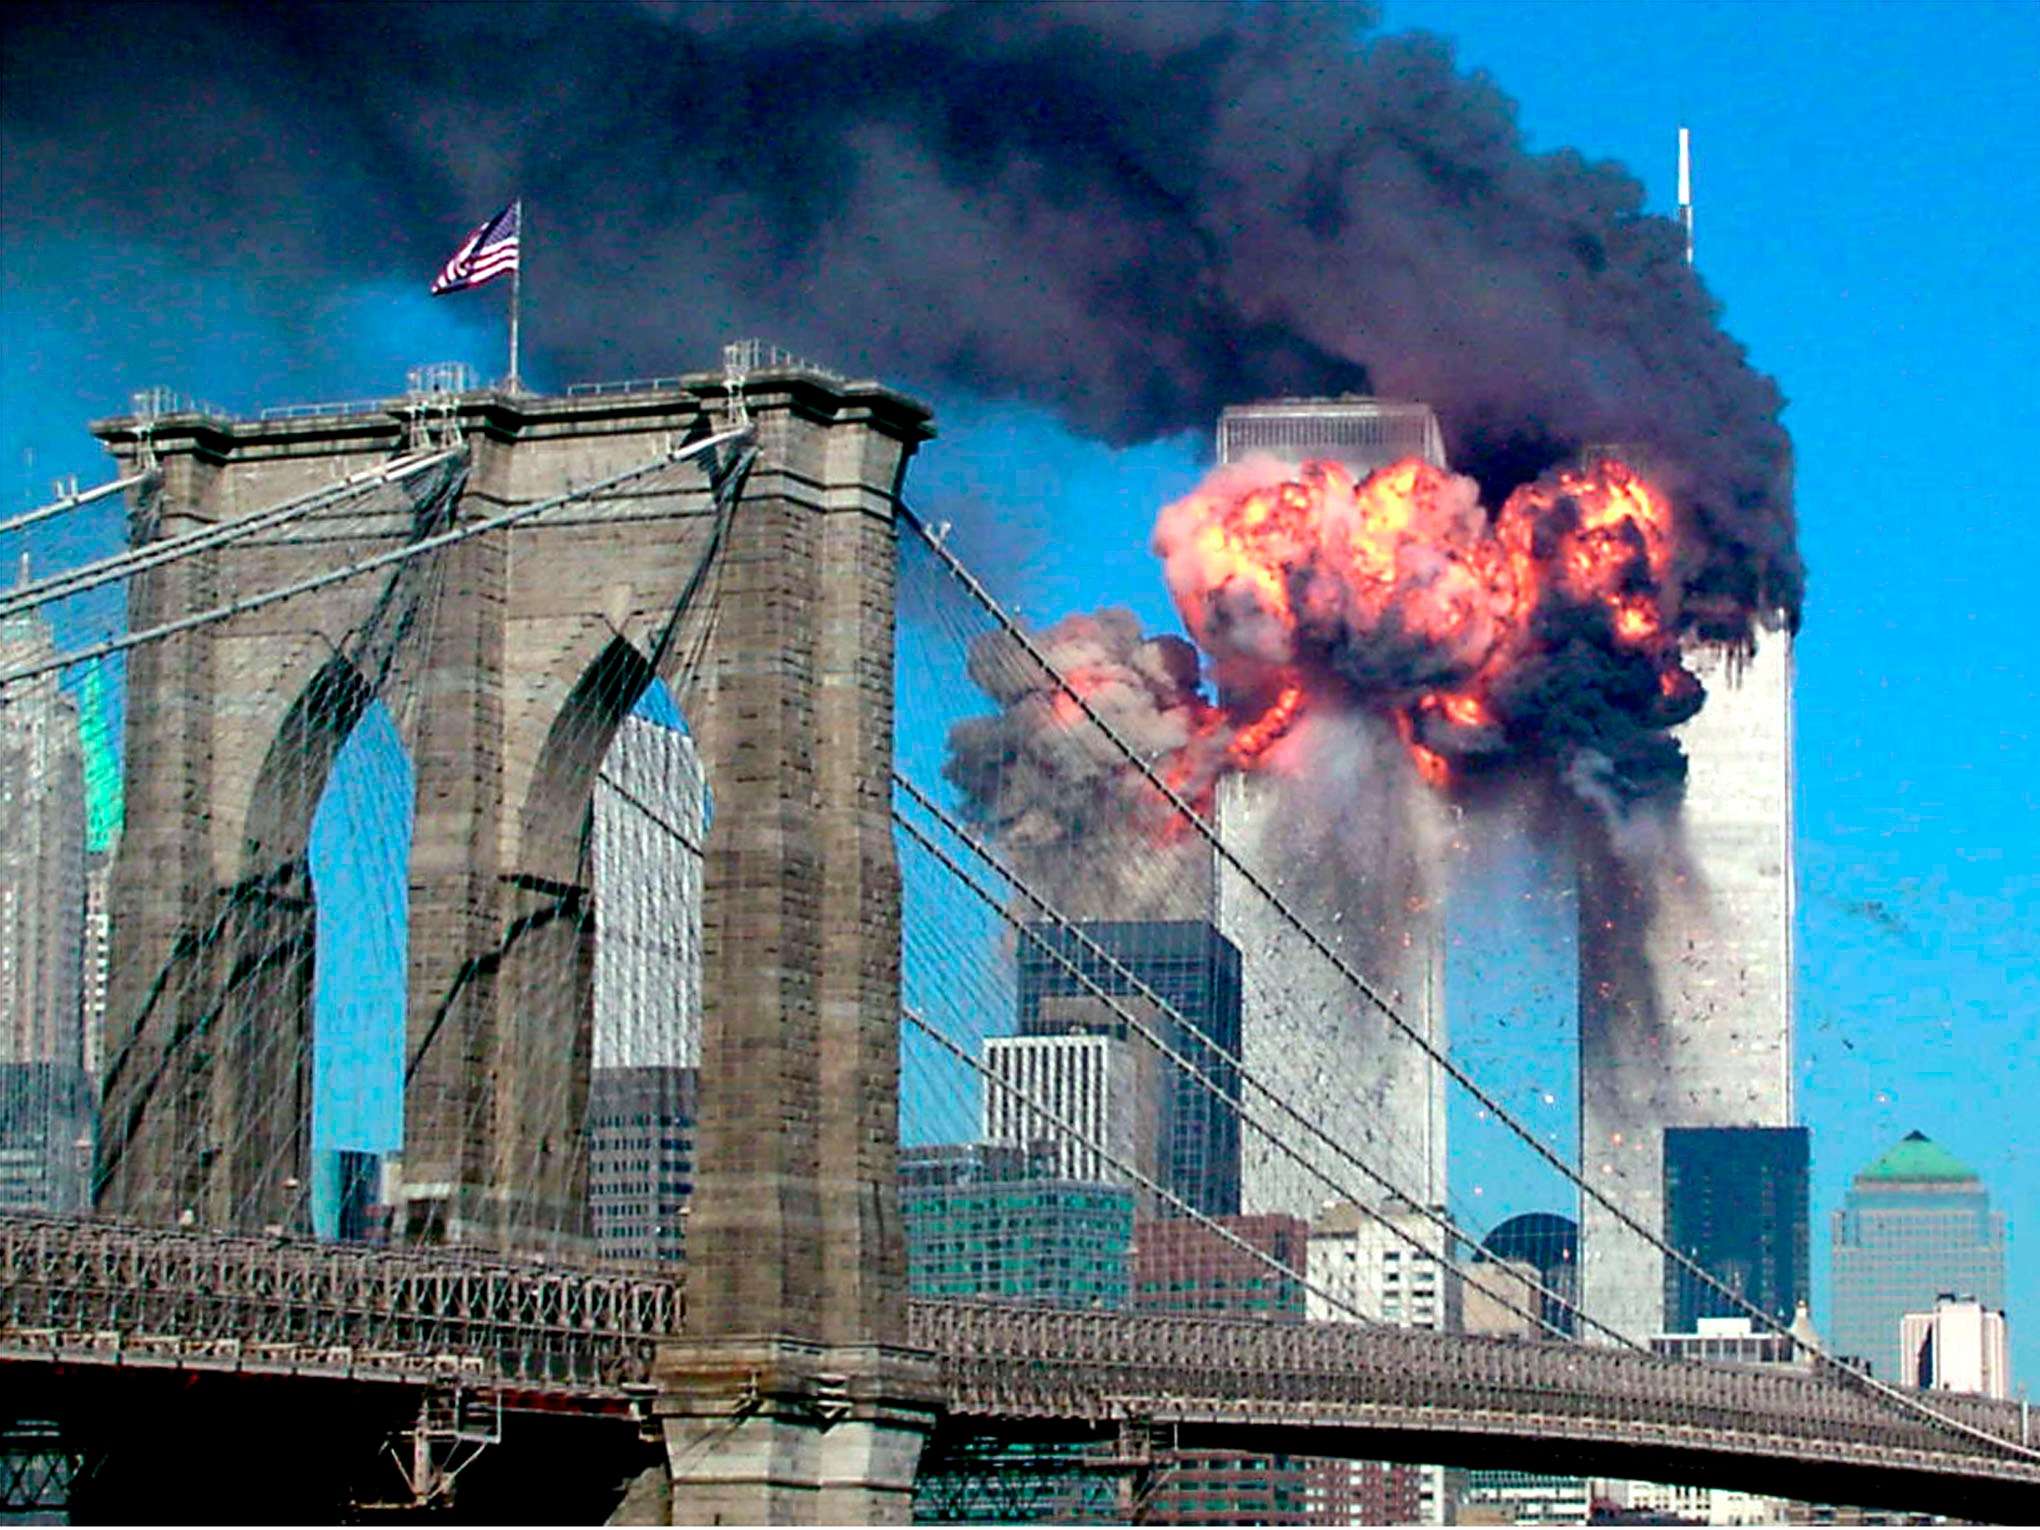 The impact of the two jets was devastating, smashing through the steel structure of the towers and igniting fires that eventually brought the buildings down. Warplanes took to the skies. Every non-military flight in U.S. airspace was ordered to land.